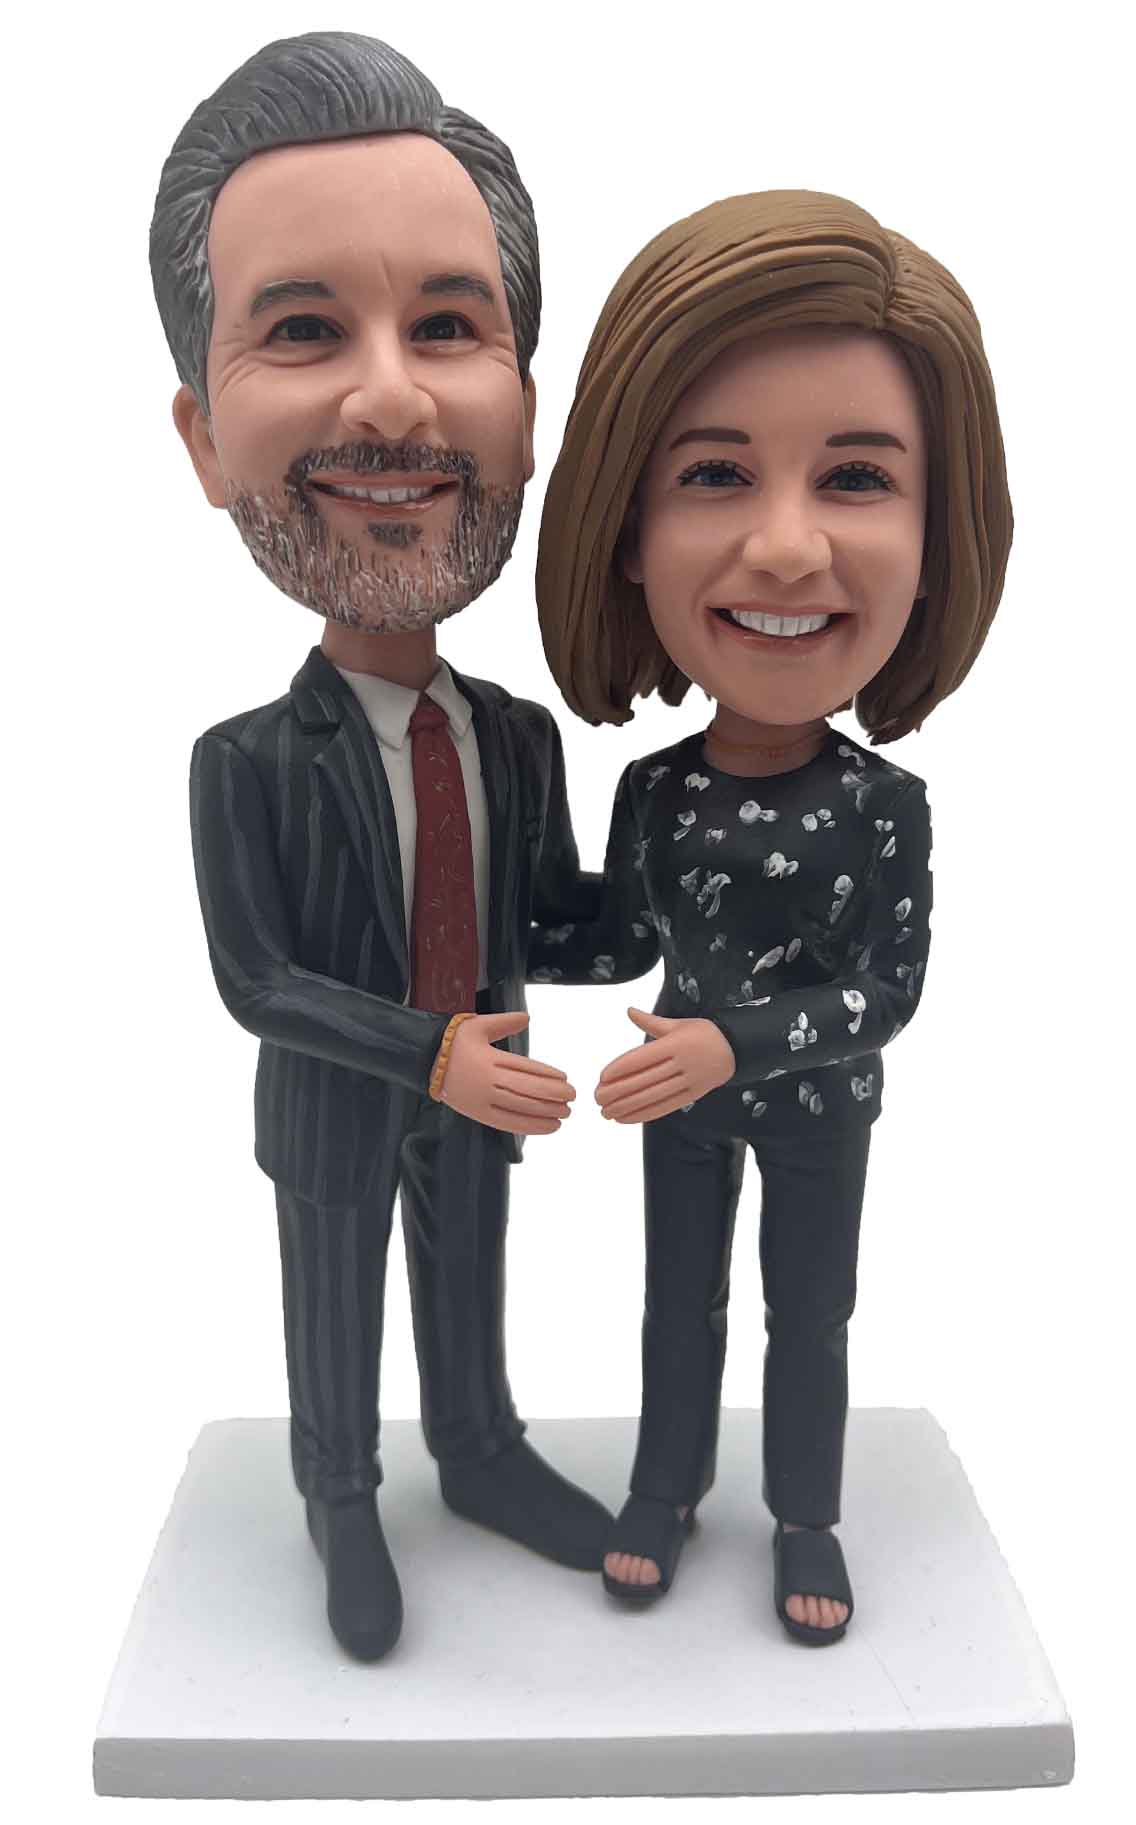 Personalized cake toppers for parents wedding figurines made from photos